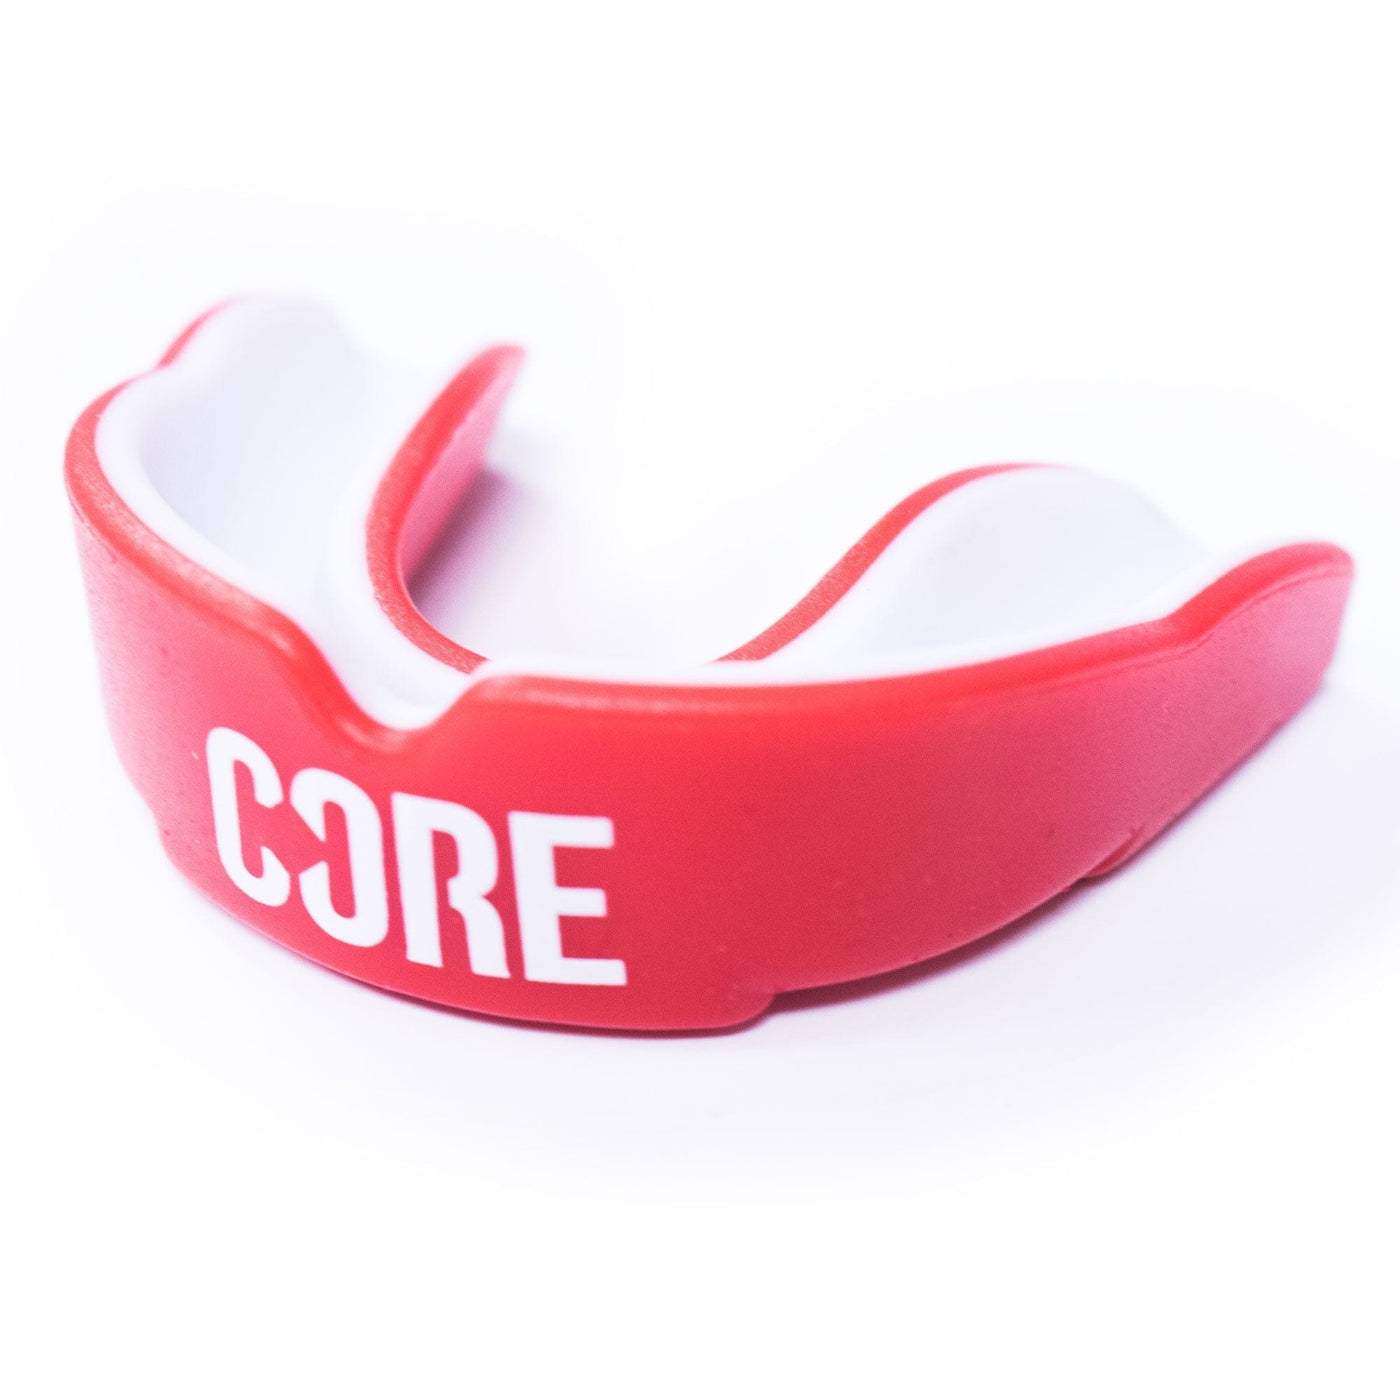 CORE Protection Sports Mouth Guard Gum Shield Red I Mouthguards Side